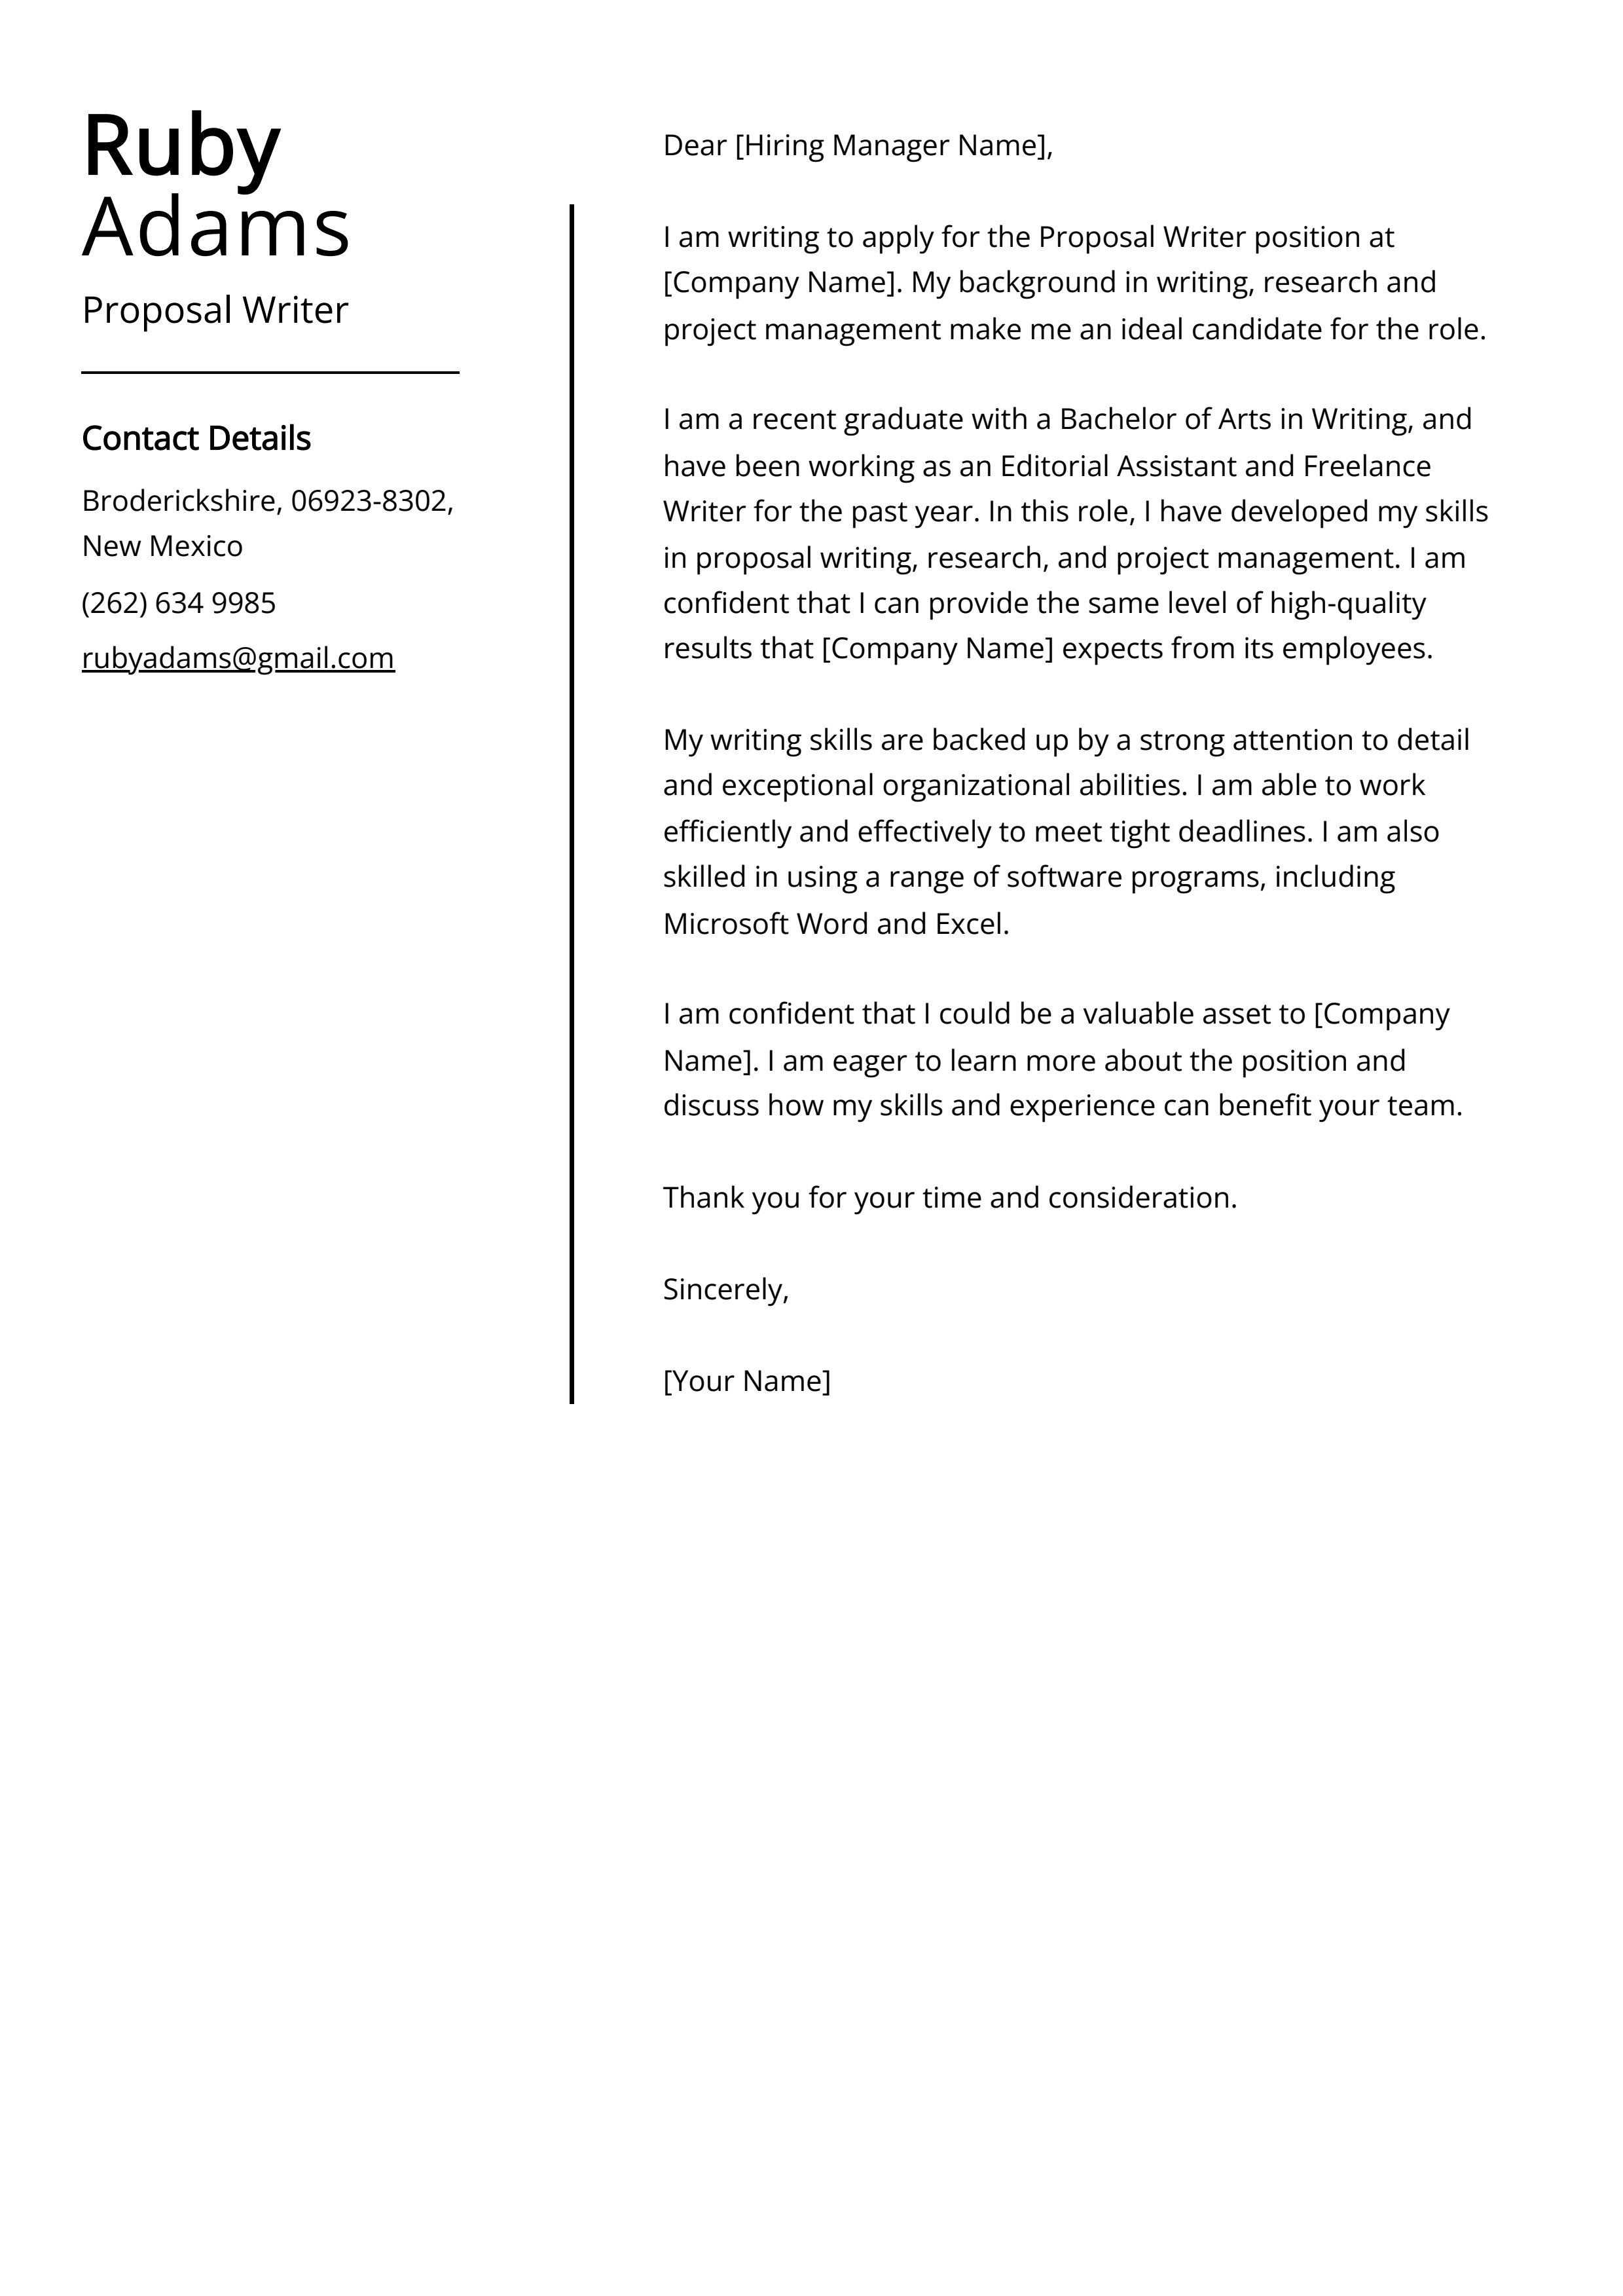 Proposal Writer Cover Letter Example